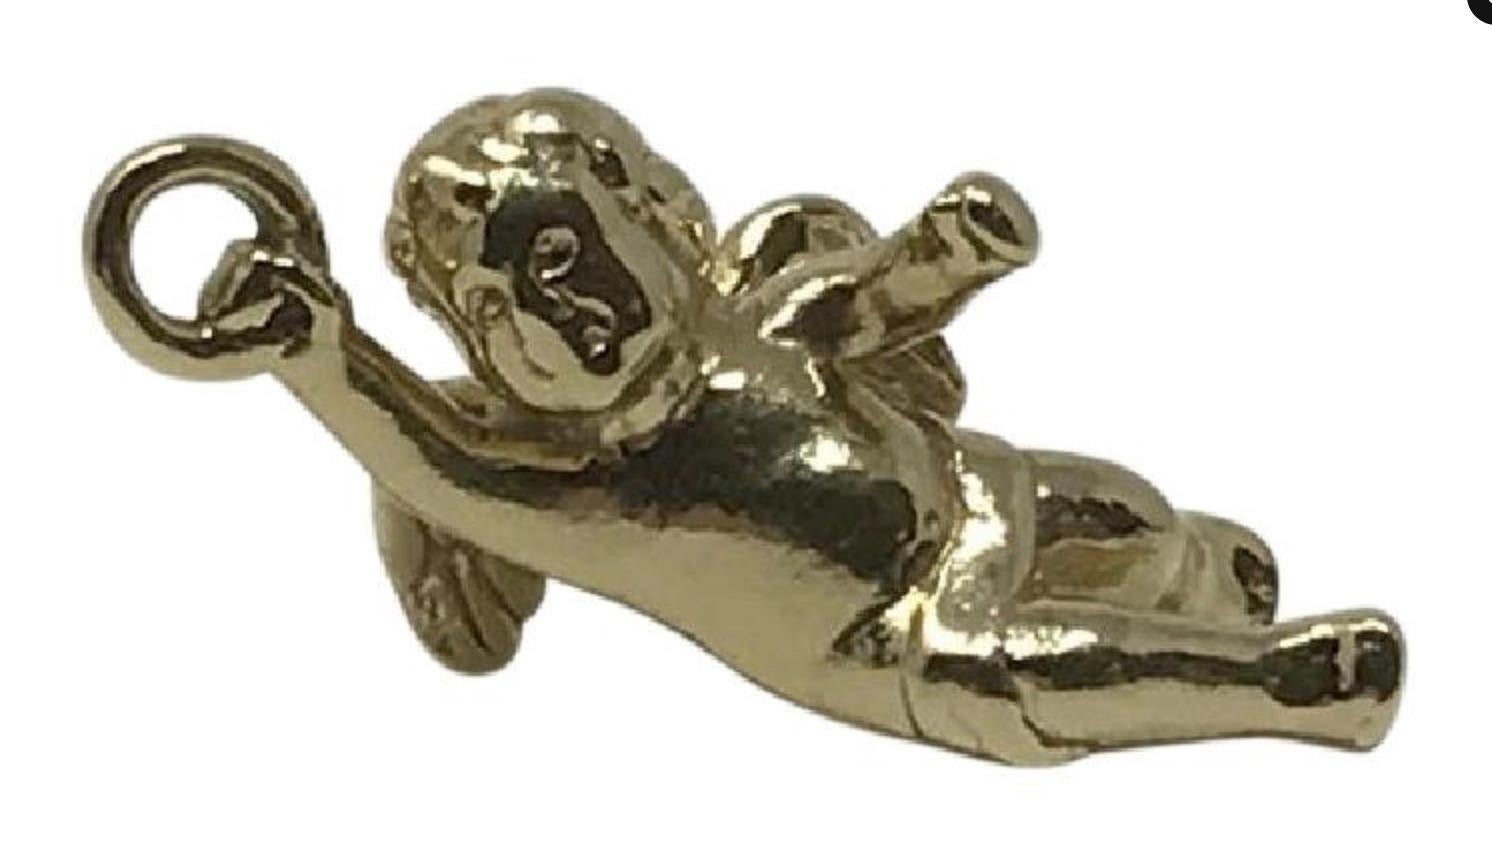 Item - Tiffany and Co. 18k Gold Cherub Charm/Pendent

Condition - Exceptional

SKU - 1547

Original Retail Price - $1,200.00 + tax (See Photo of Receipt)

Dimensions - 15mm x 25mm x 13mm

Material - 18k Gold

Weight - 7 grams

Comes with - Dust